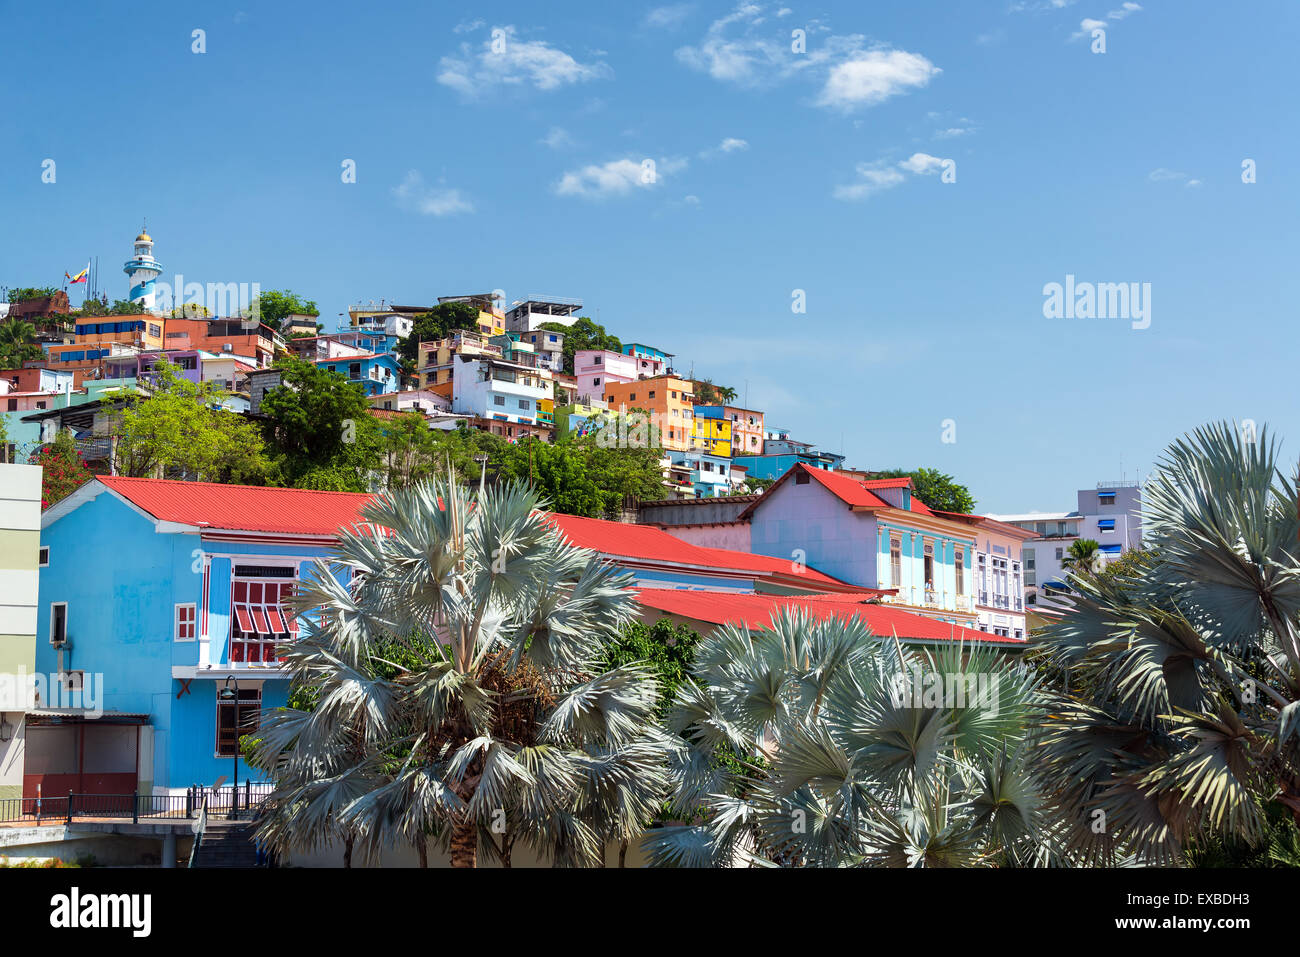 View of Santa Ana hill with palm trees in the foreground in Guayaquil, Ecuador Stock Photo